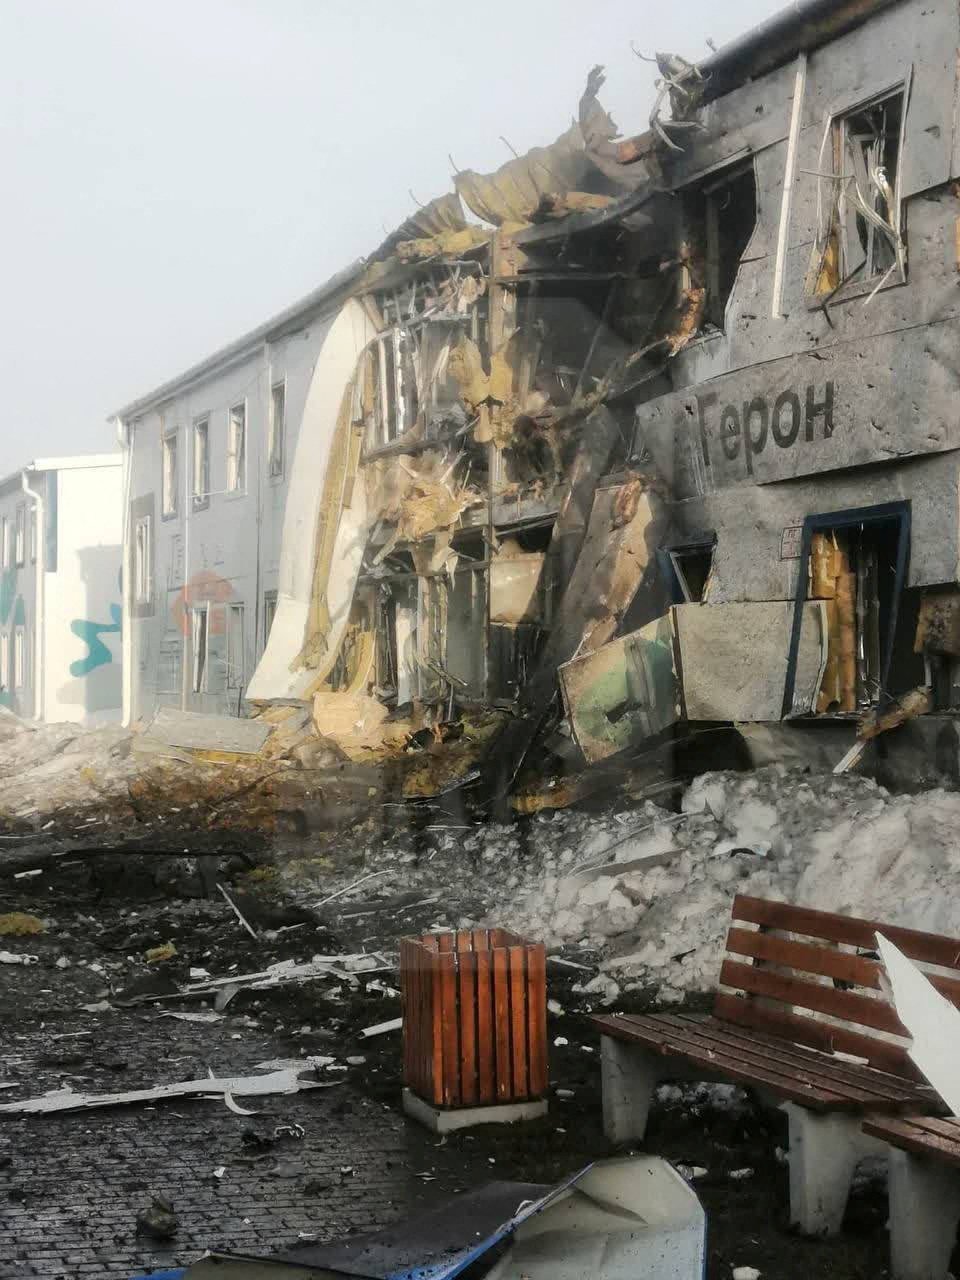 A damaged building is seen after a Ukrainian drone attack in Yelabuga, in Russia’s Tatarstan province, in an image released on Tuesday. Photo: Ostorozhno Novosti via Reuters